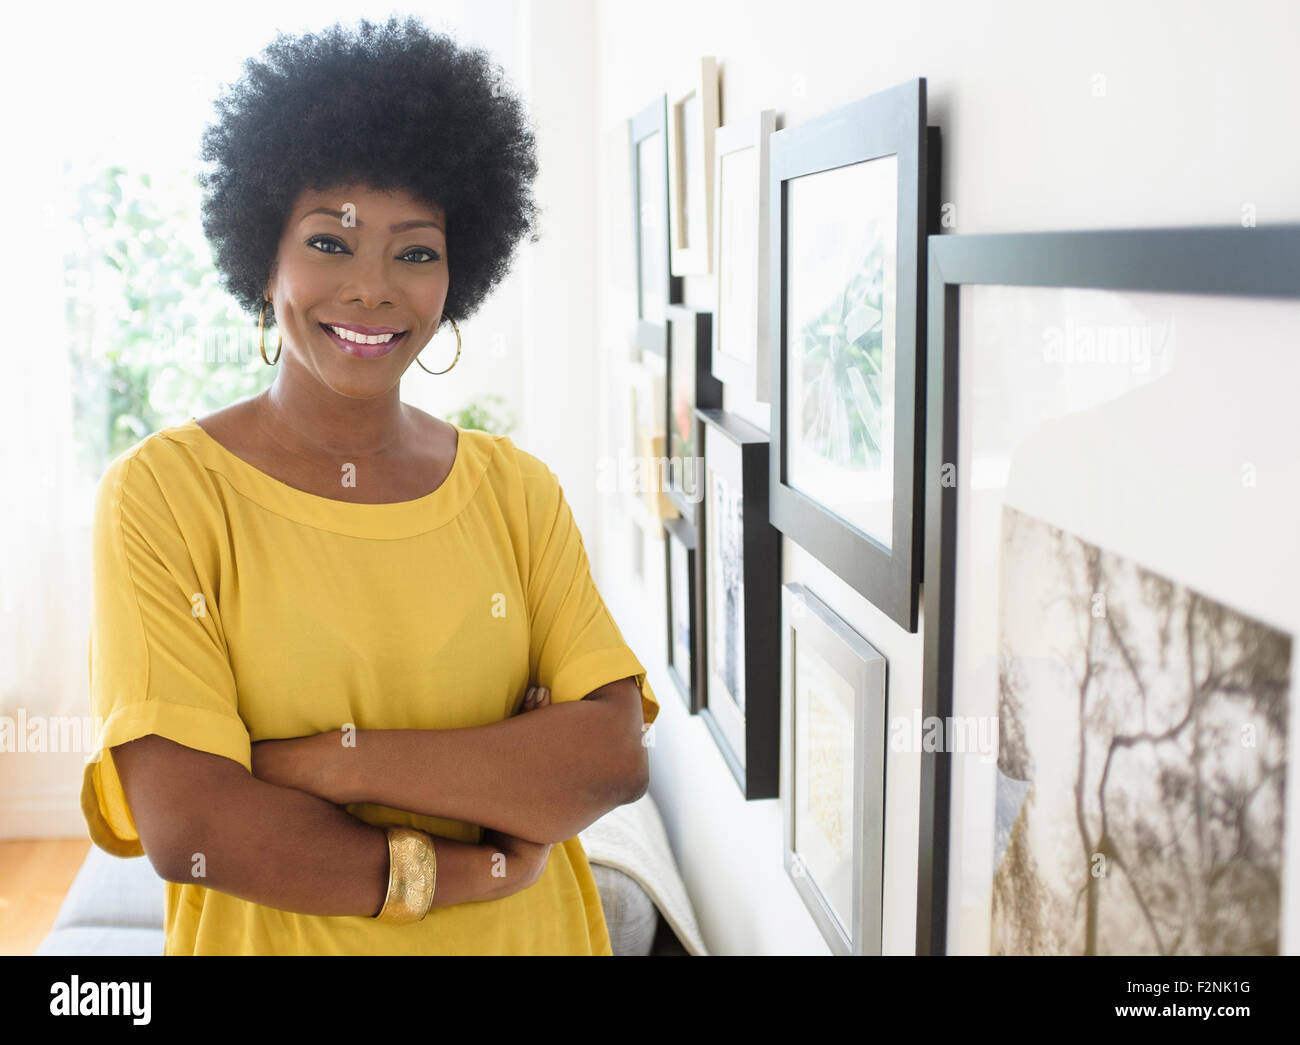 African American woman standing near pictures on wall Stock Photo